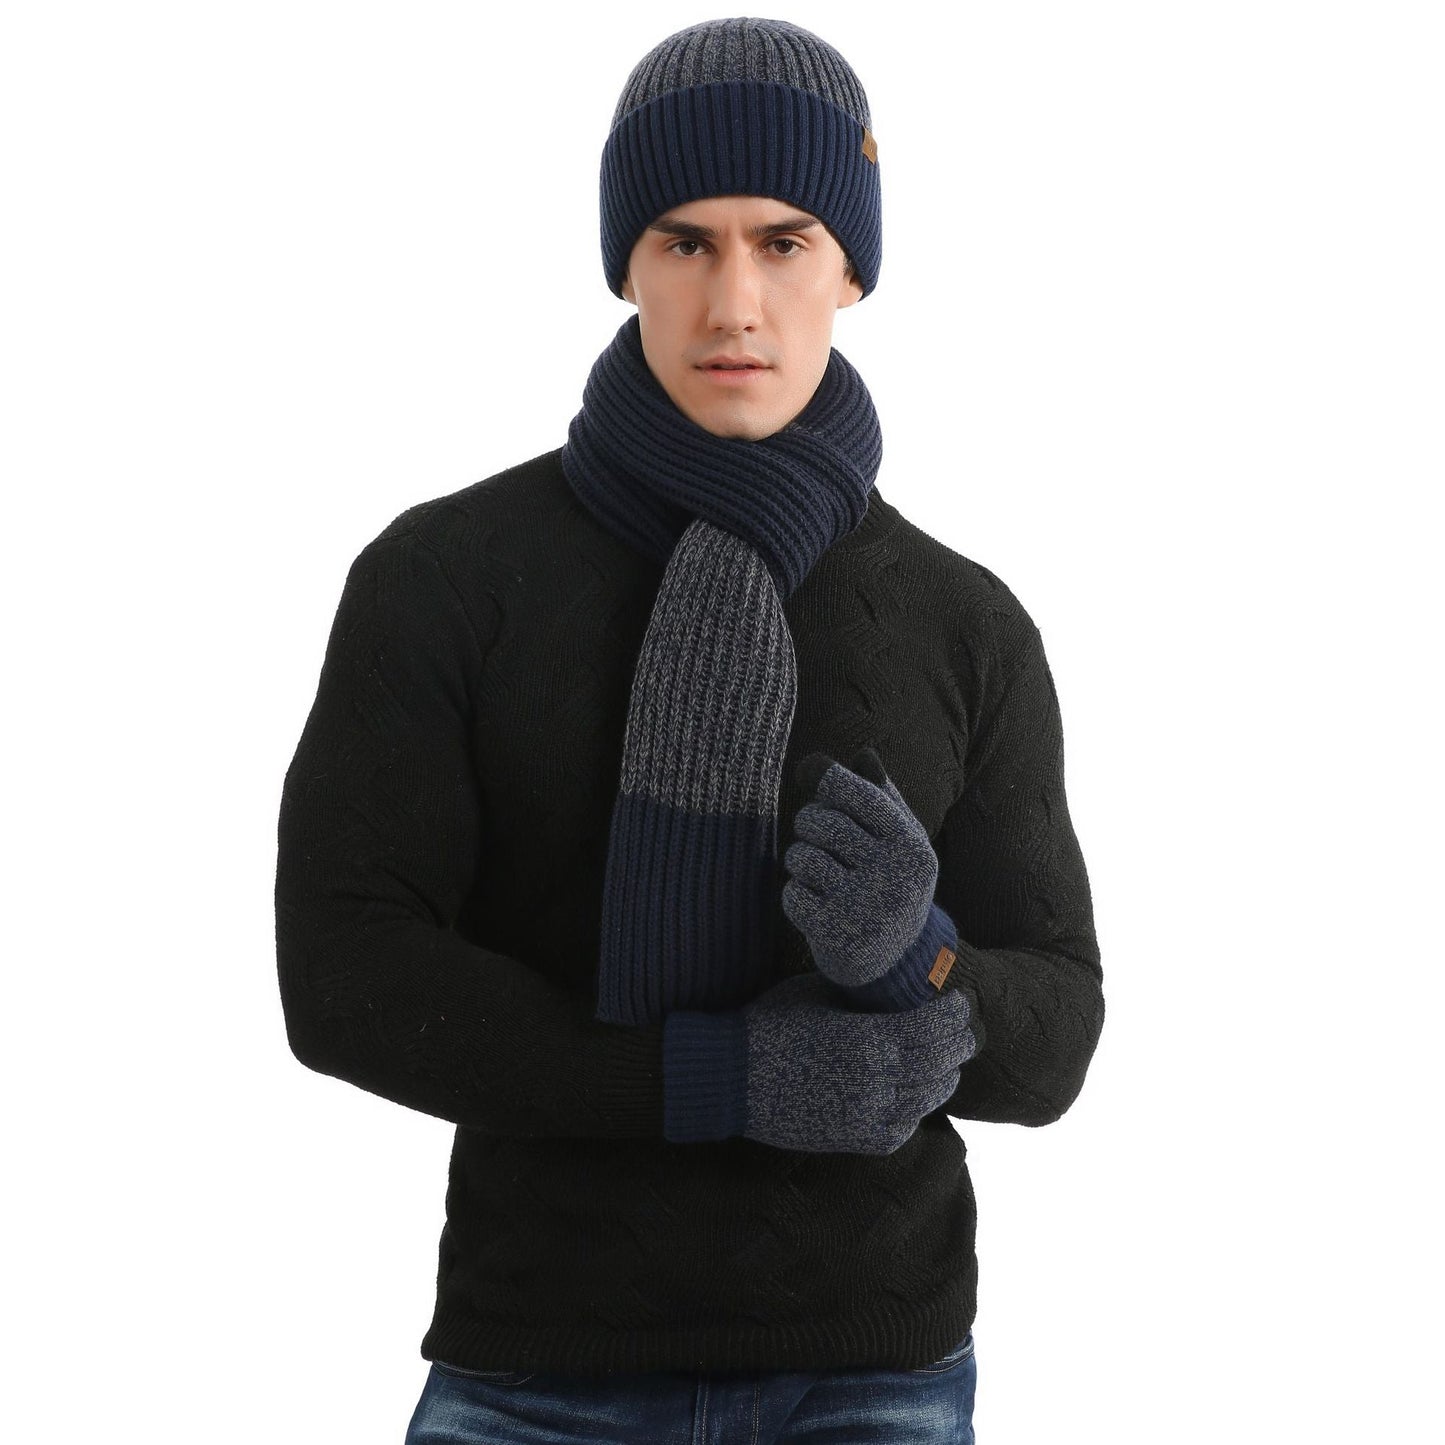 Winter Men's Warm Hats+Gloves+Scarf Sets-Hats-Navy Blue-Free Shipping Leatheretro